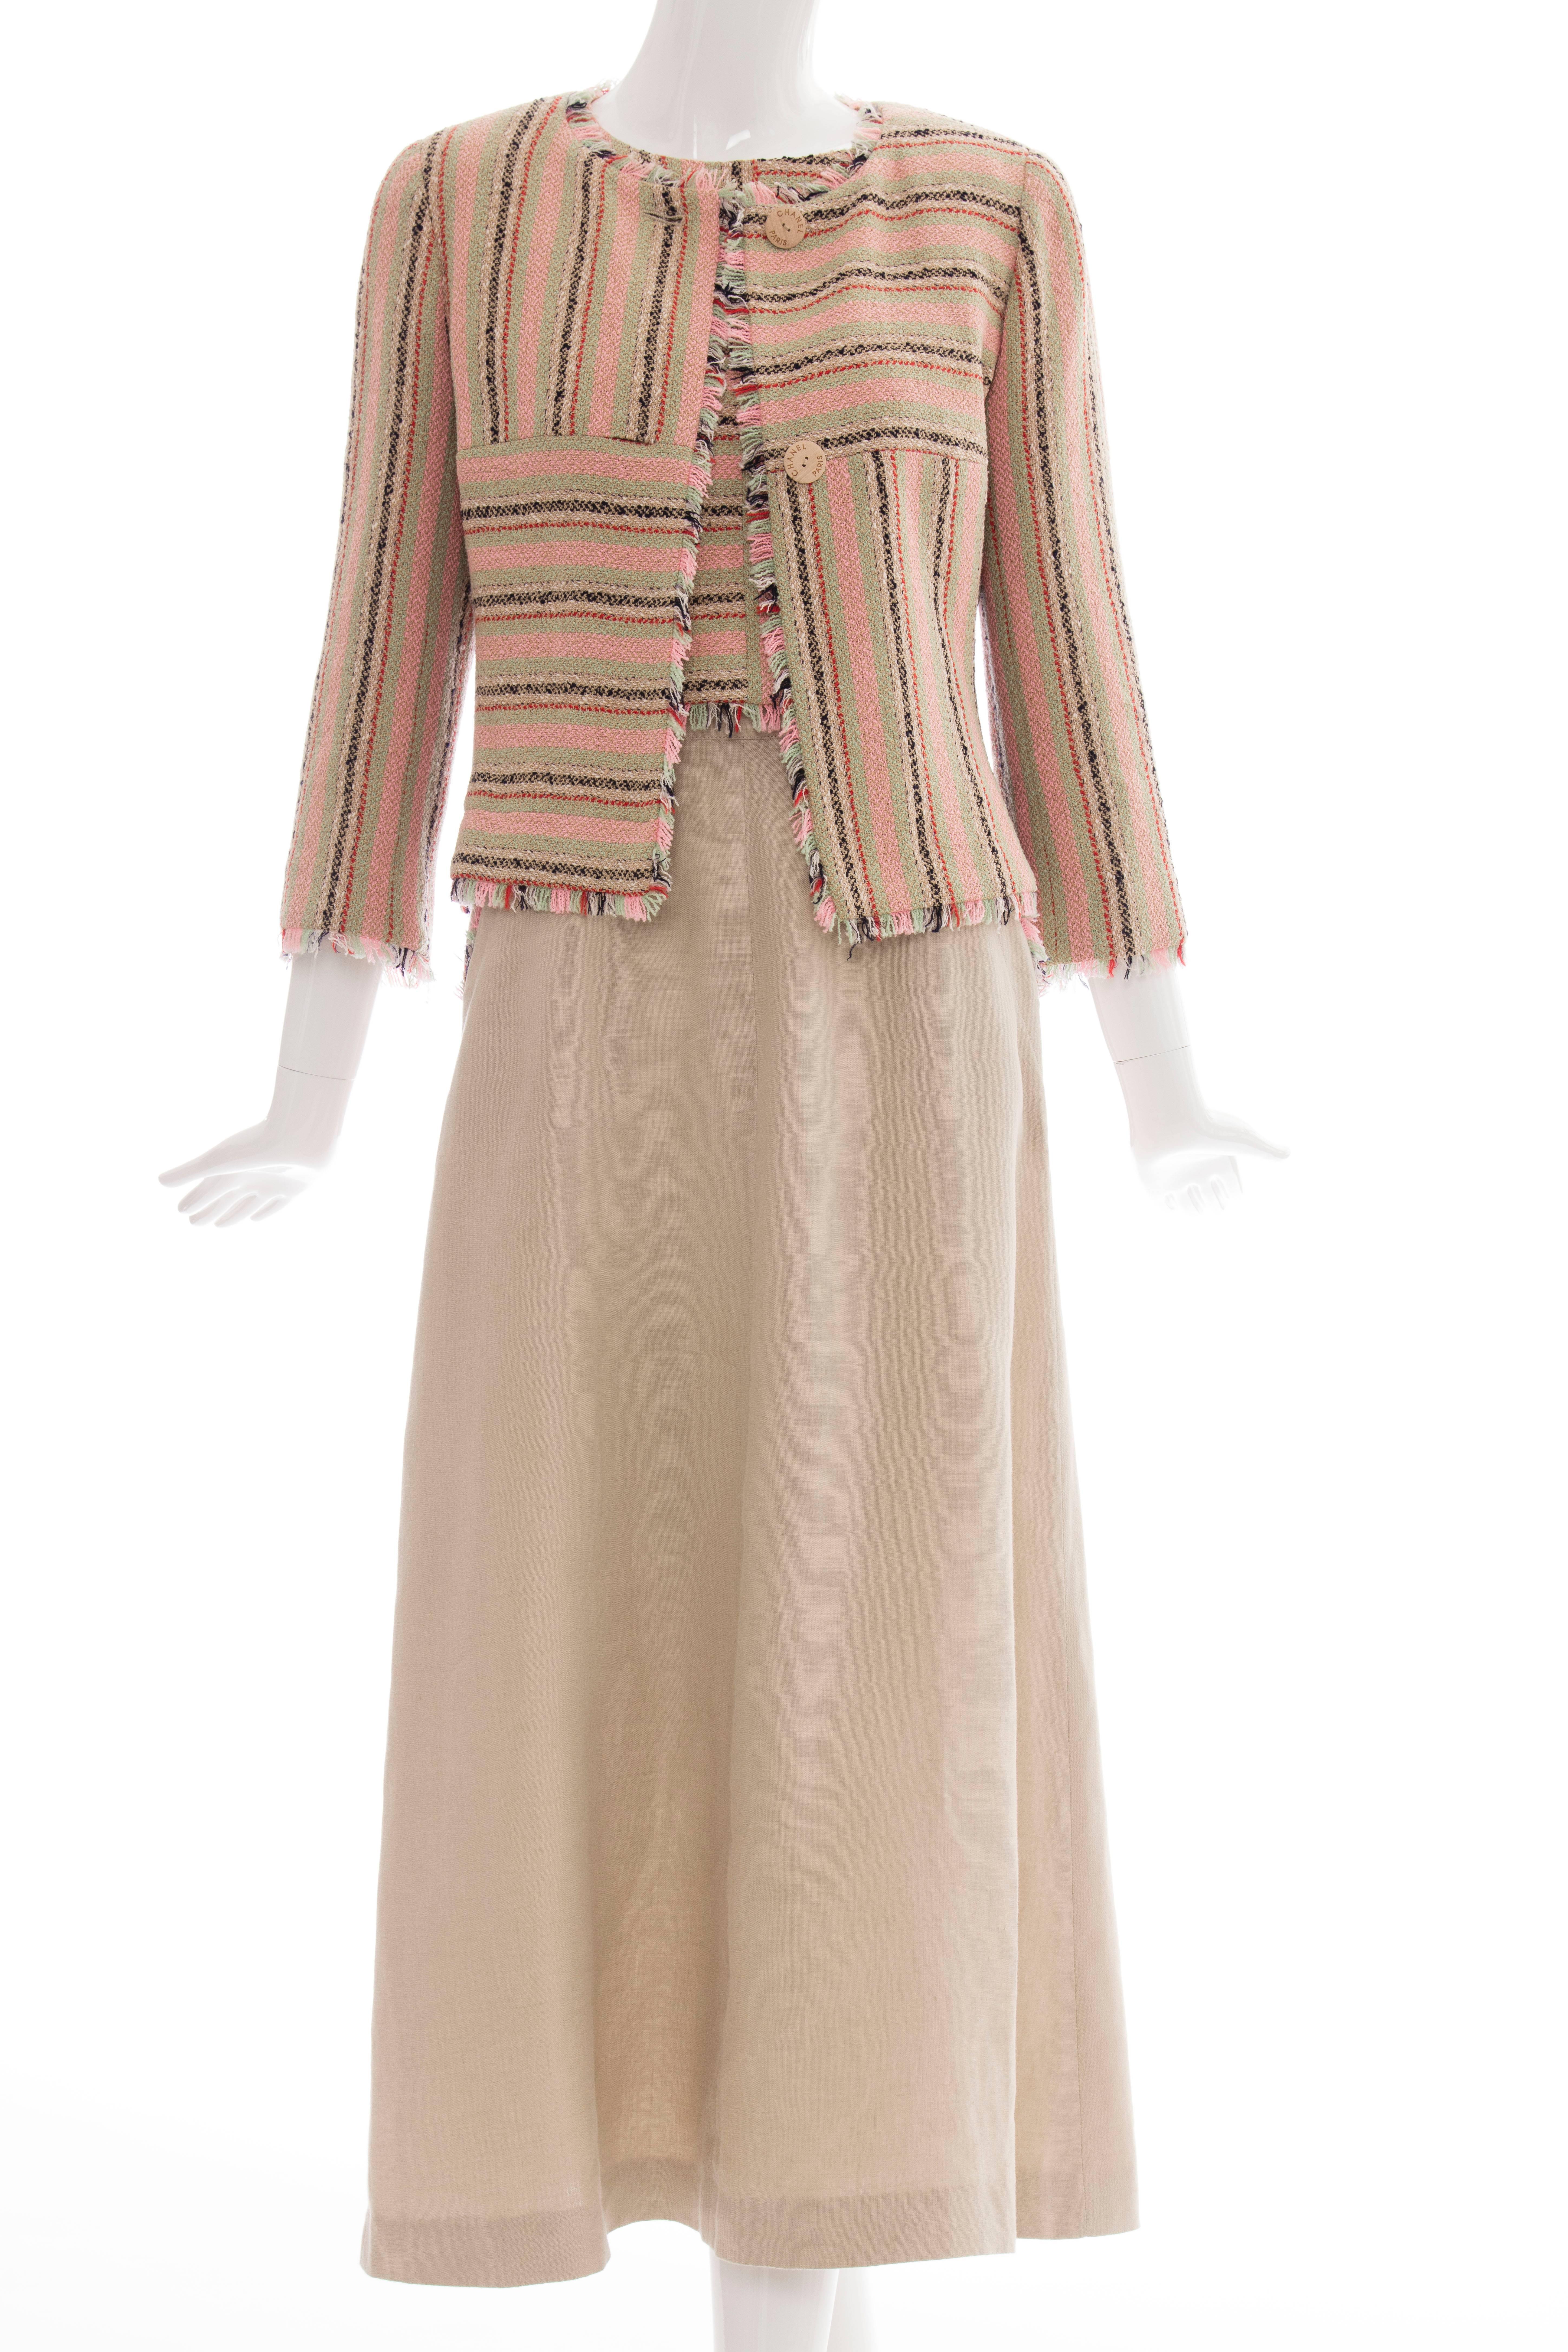 Chanel, Resort 2000 three piece linen skirt suit ensemble with sleeveless top, button front jacket and skirt with two front pockets.
